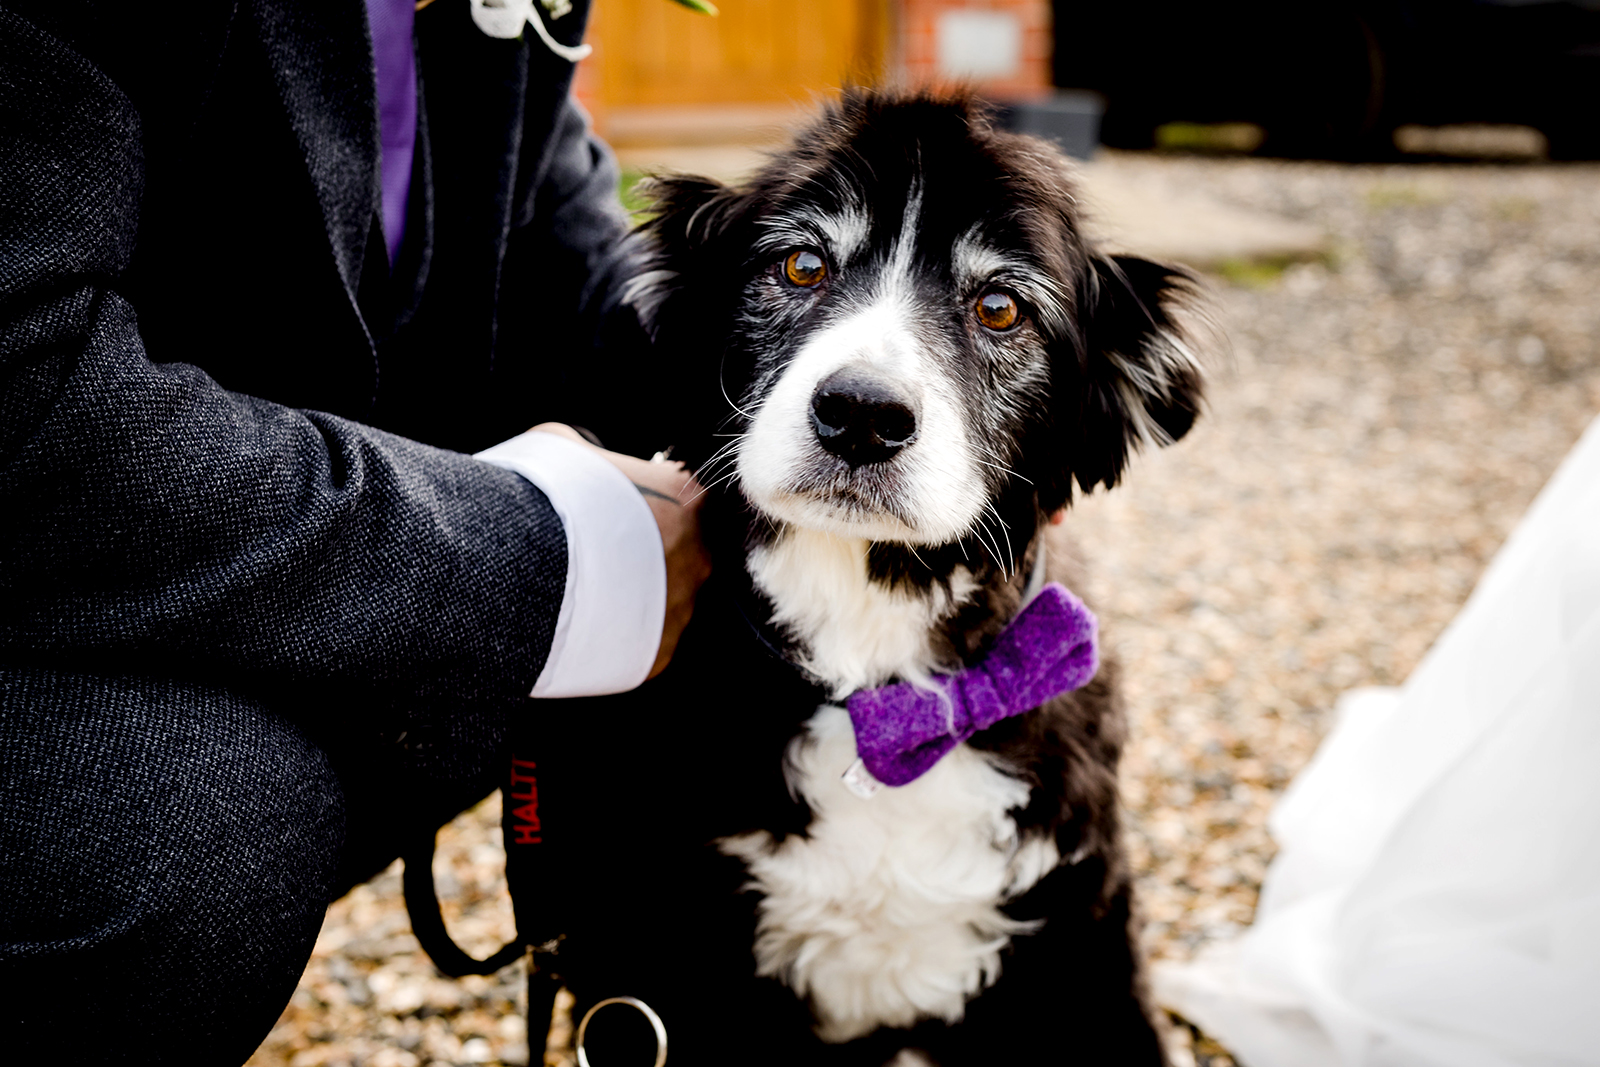 Dogs at weddings - South Wales wedding photographer